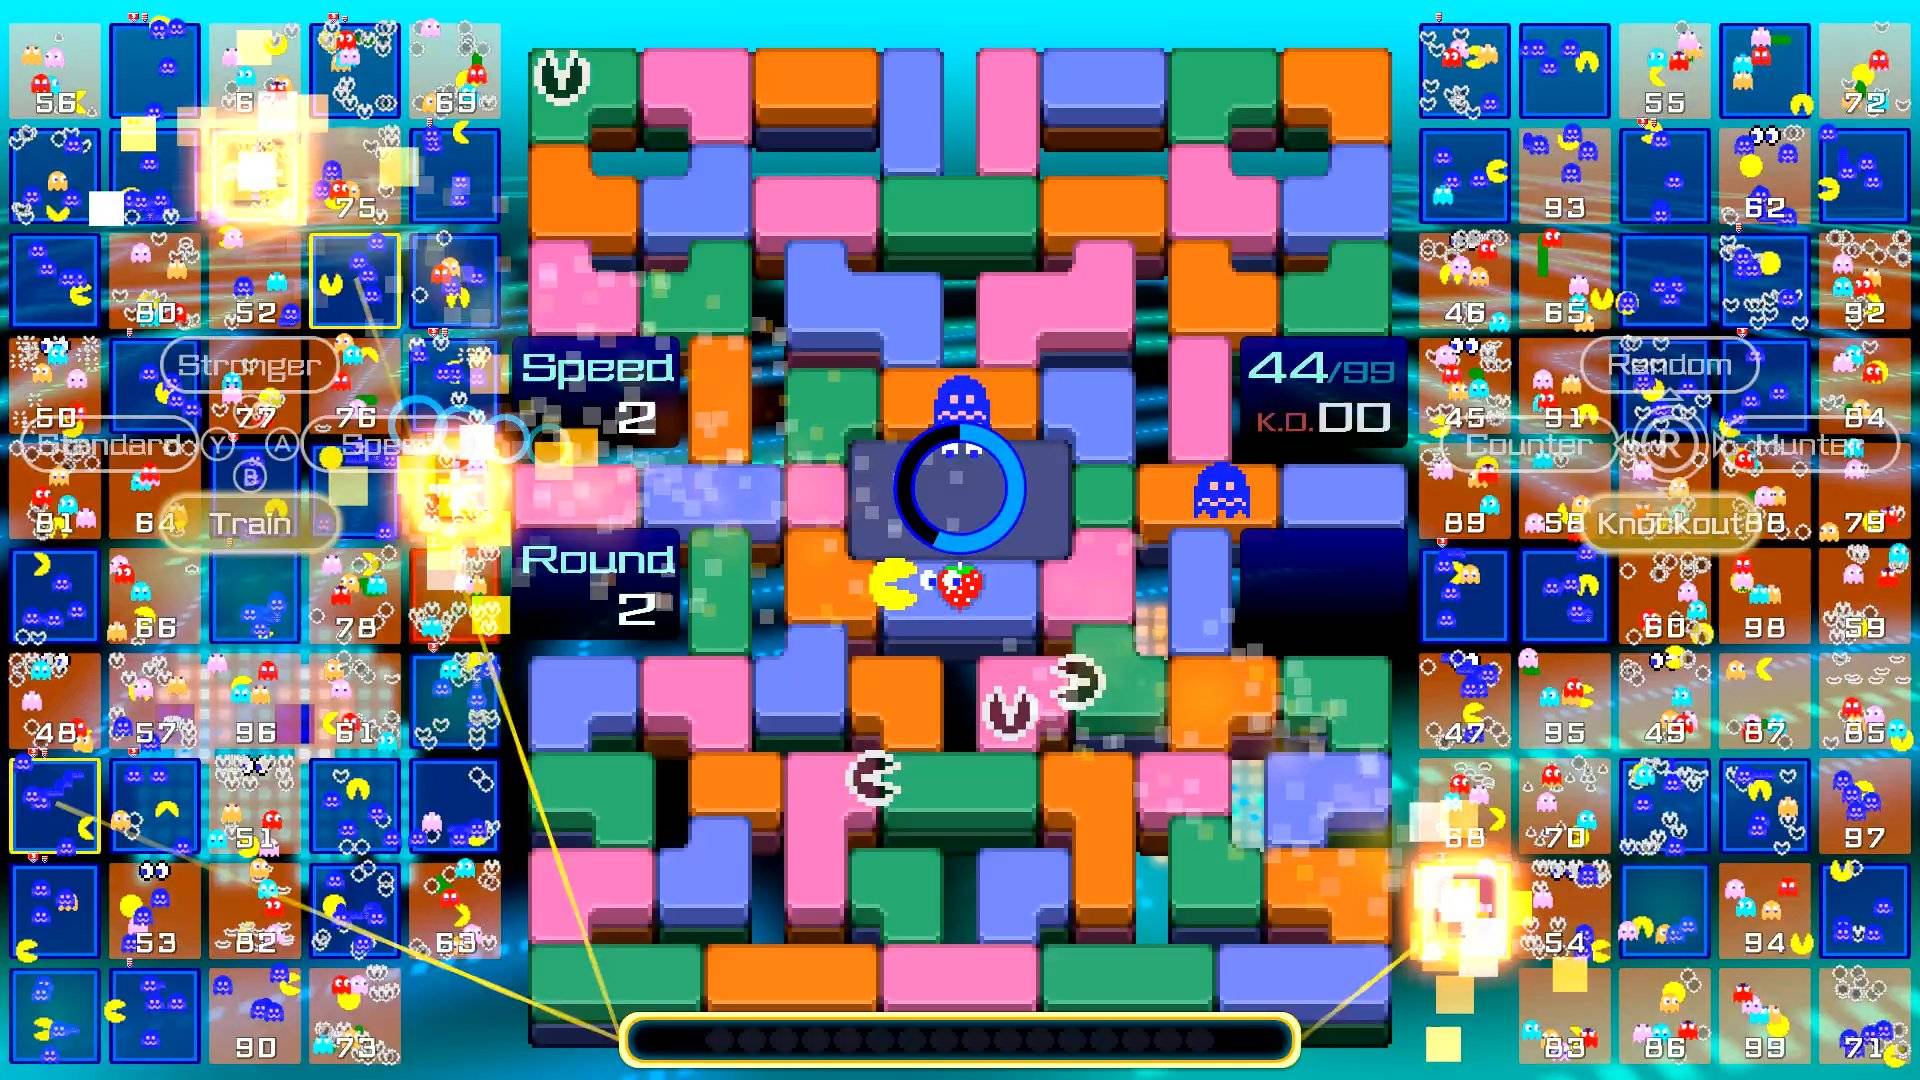 I tried playing the 99-player battle royale 'PAC-MAN 99' that